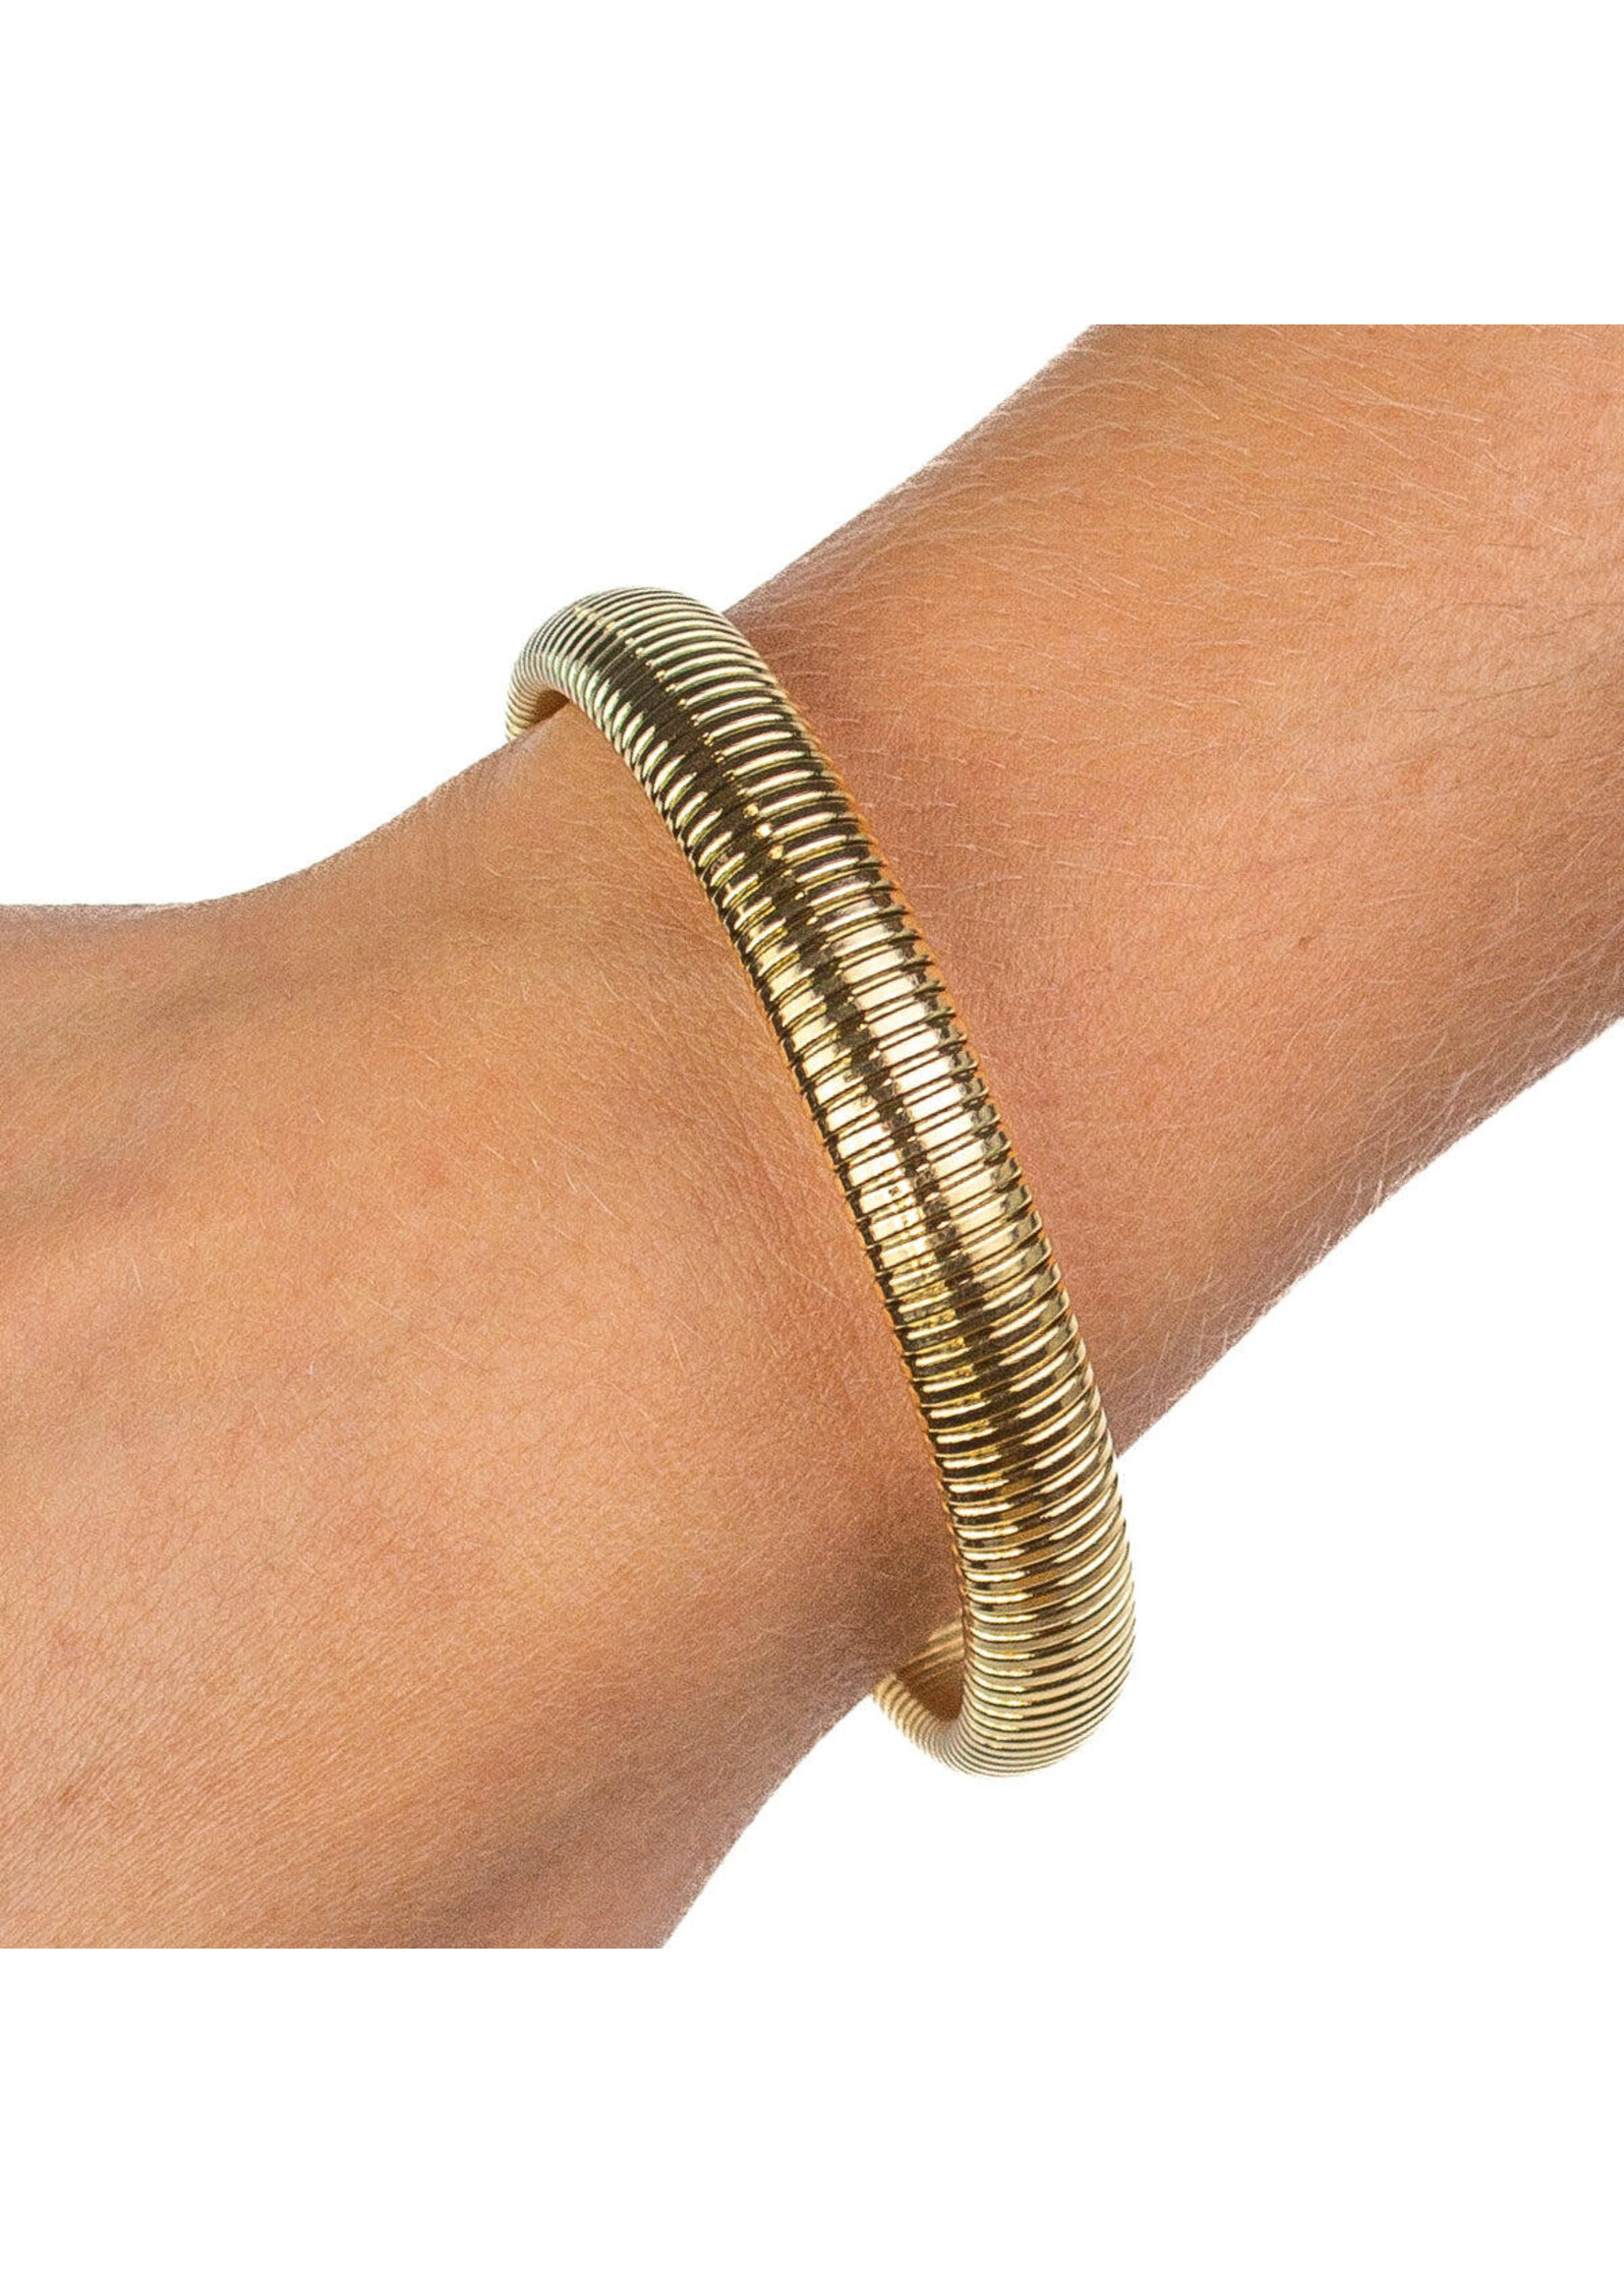 ALCO Jewelry Earthbound Bangle (Gold)